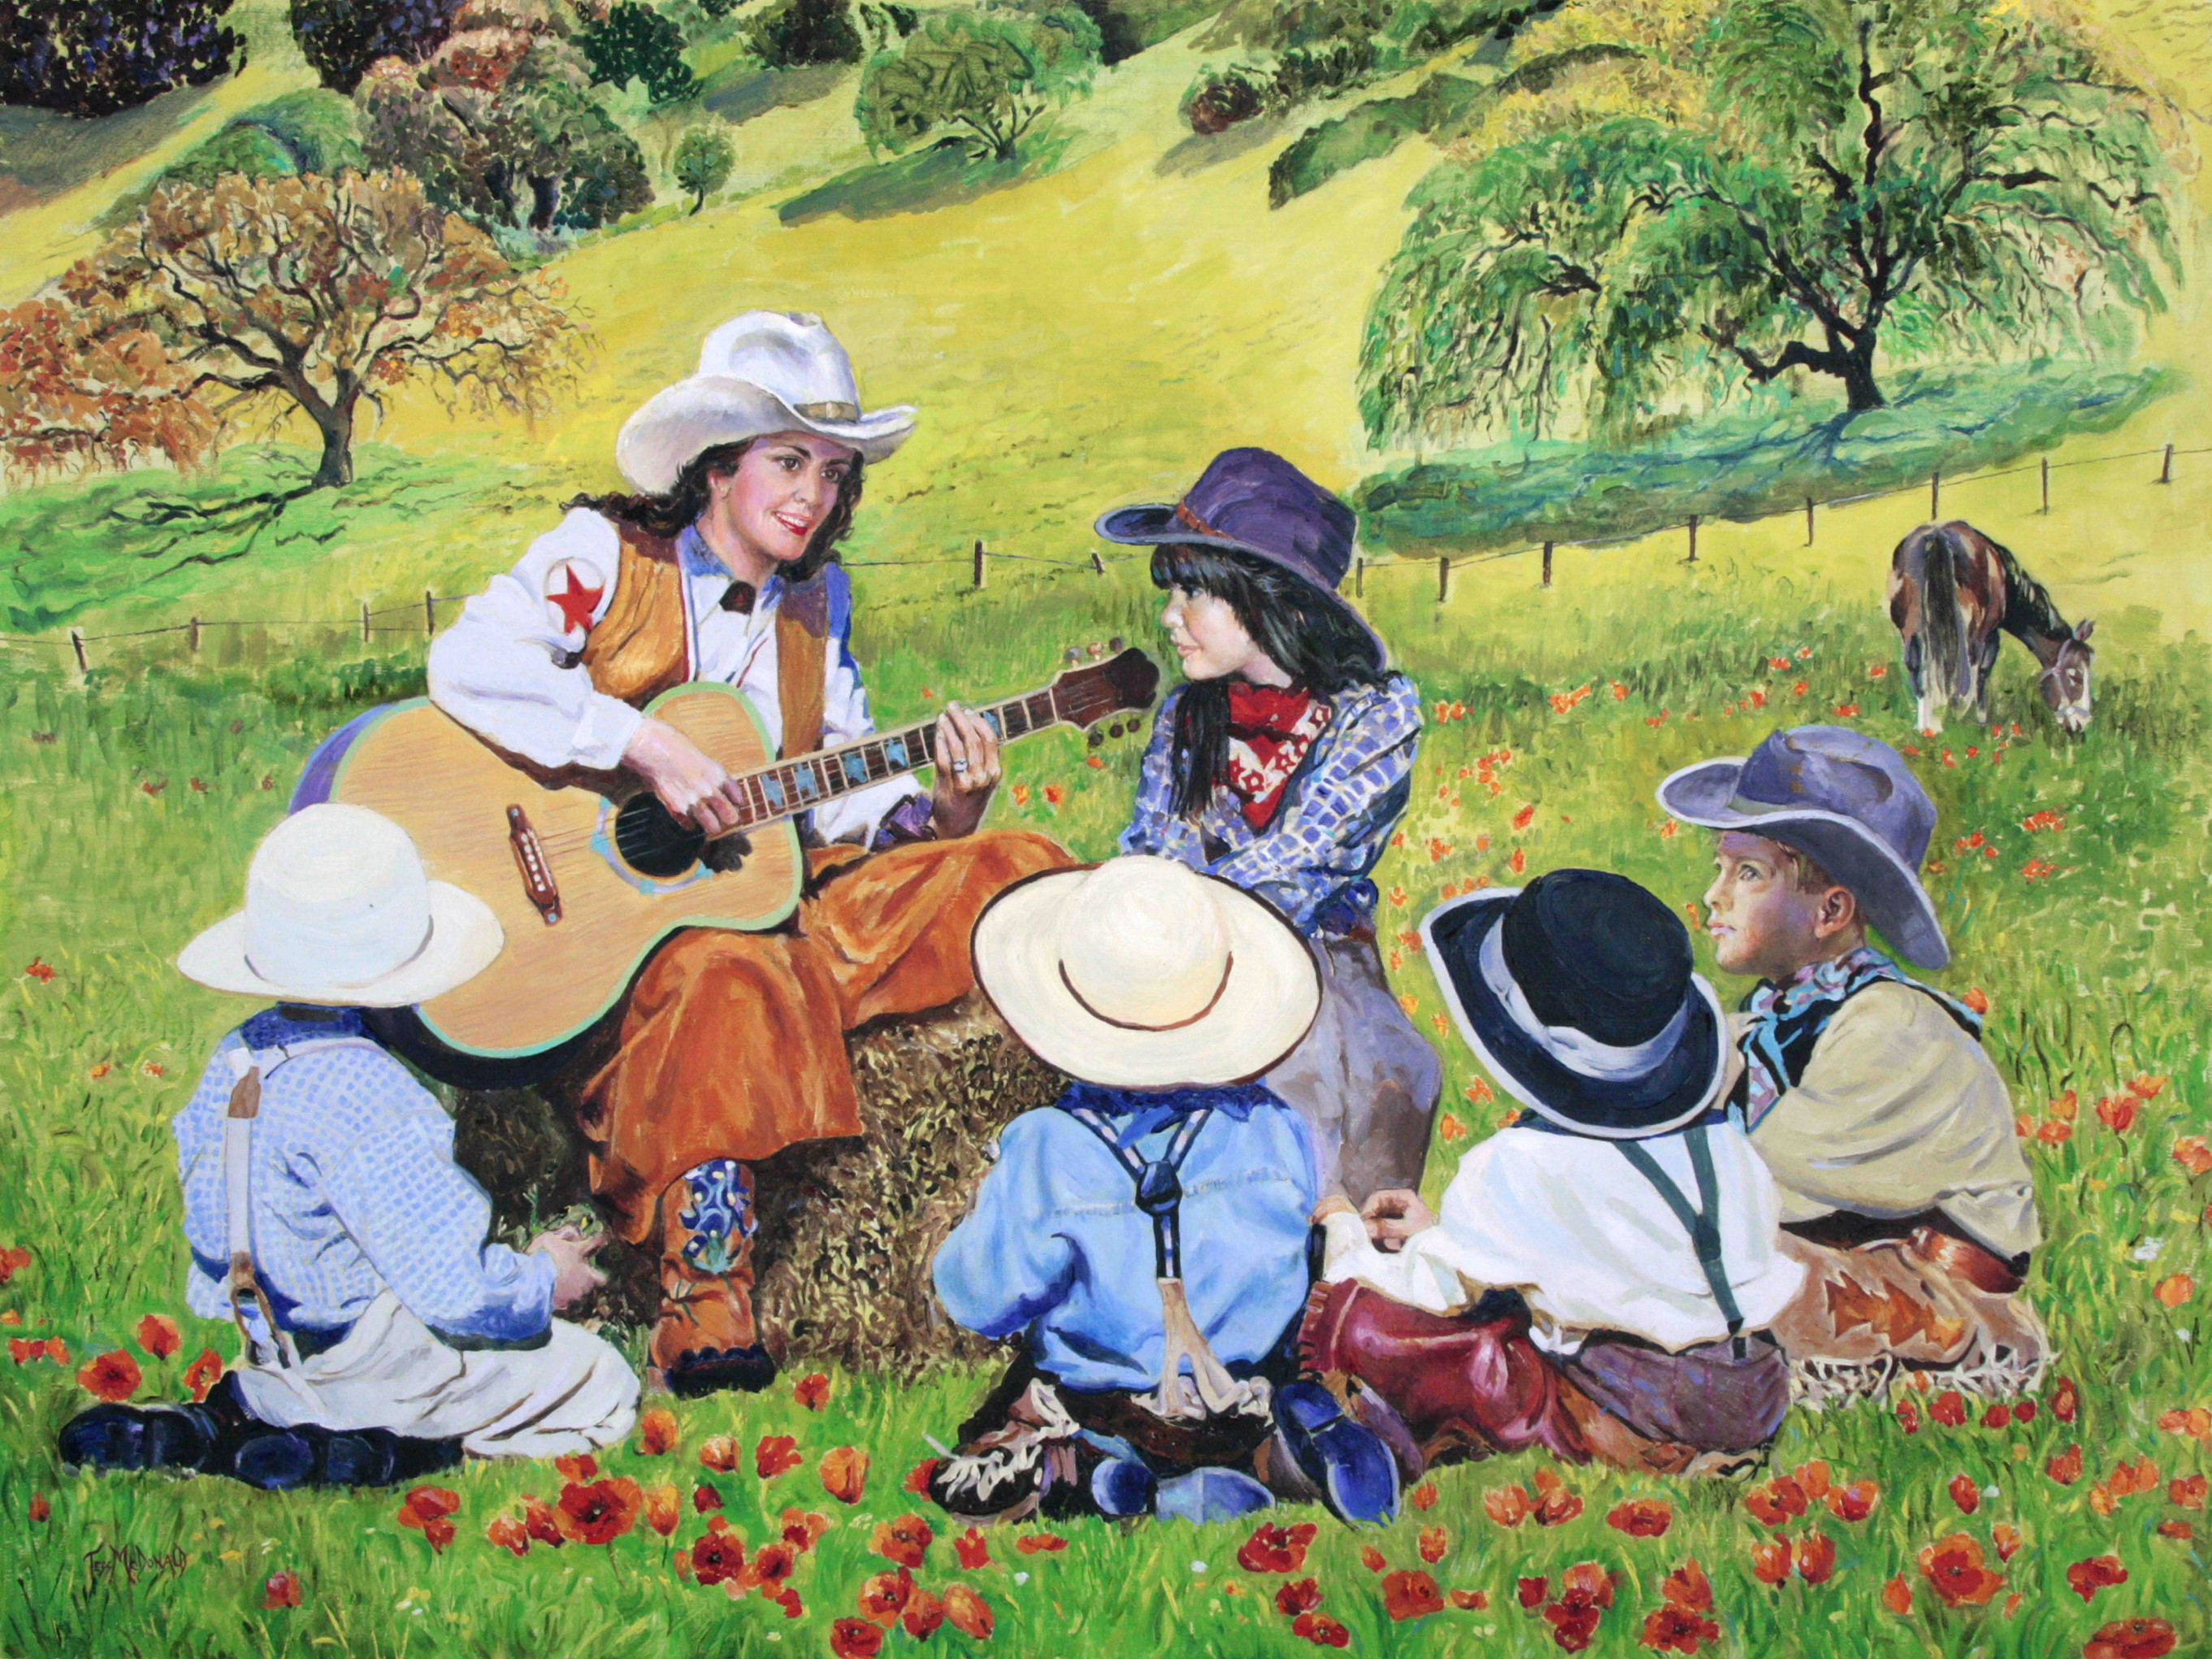 The Sing-along painting.